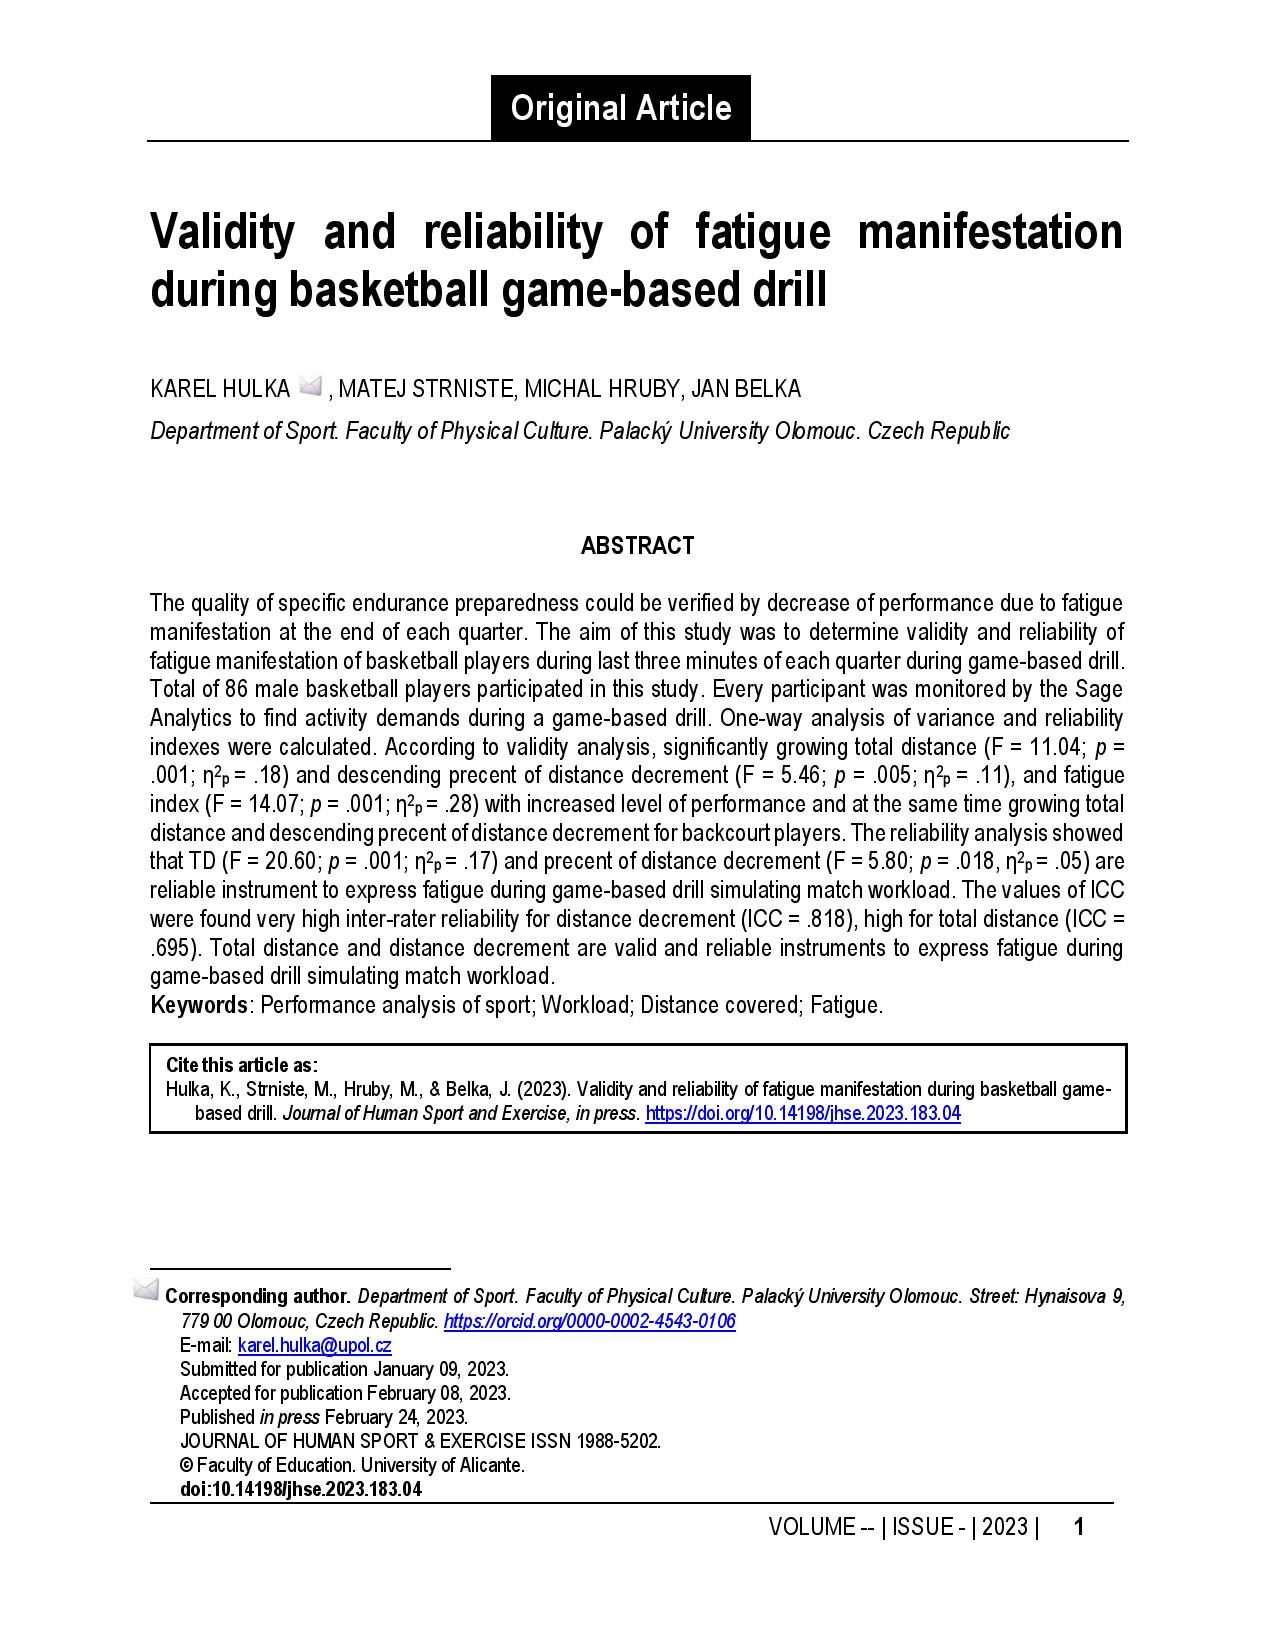 Validity and reliability of fatigue manifestation during basketball game-based drill